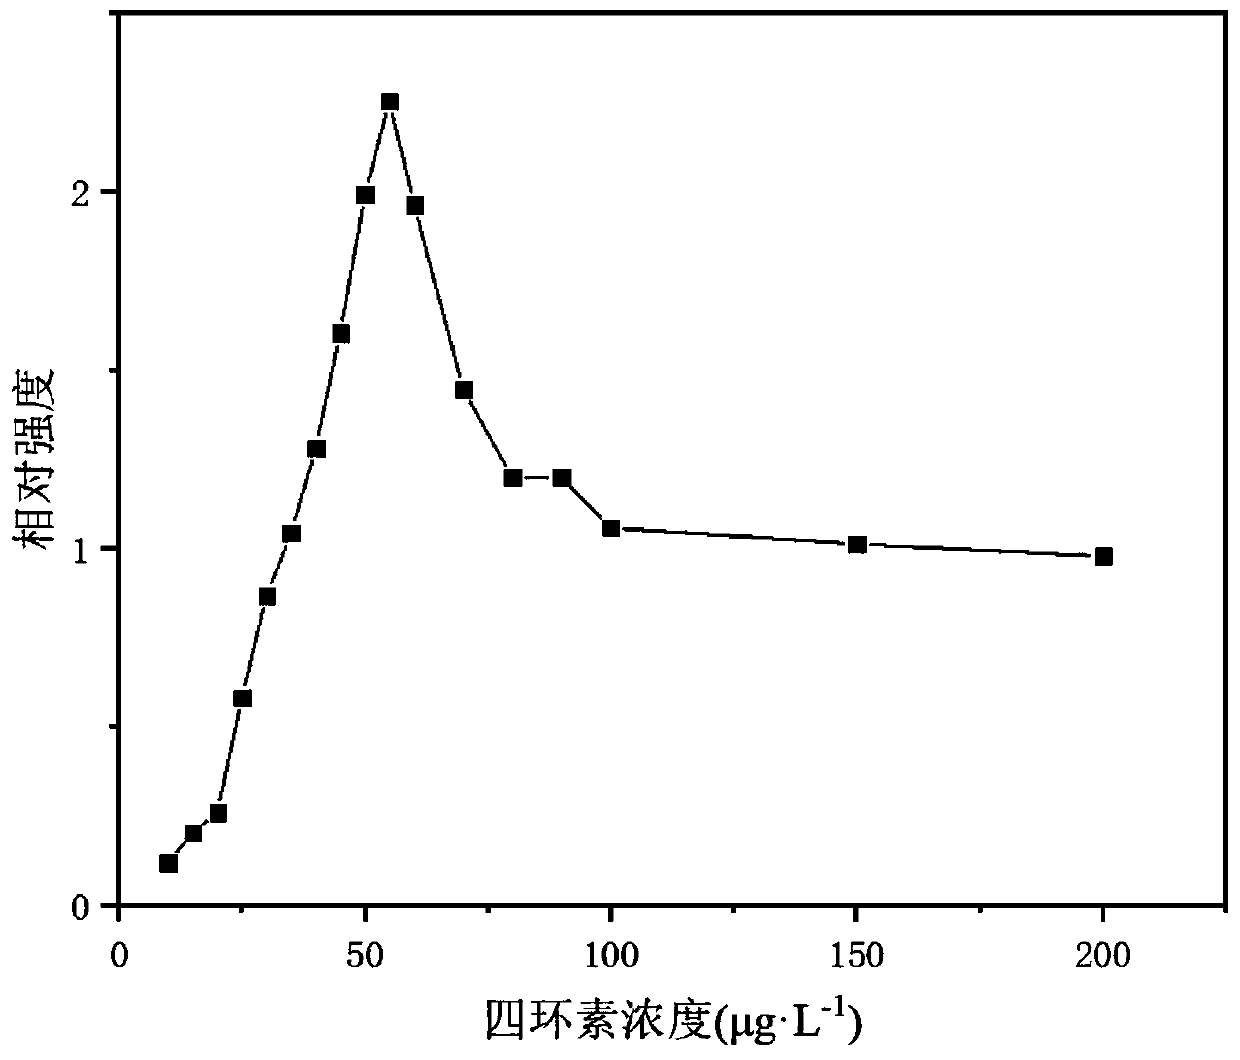 Method for detecting tetracycline in milk based on surface enhanced Raman technology